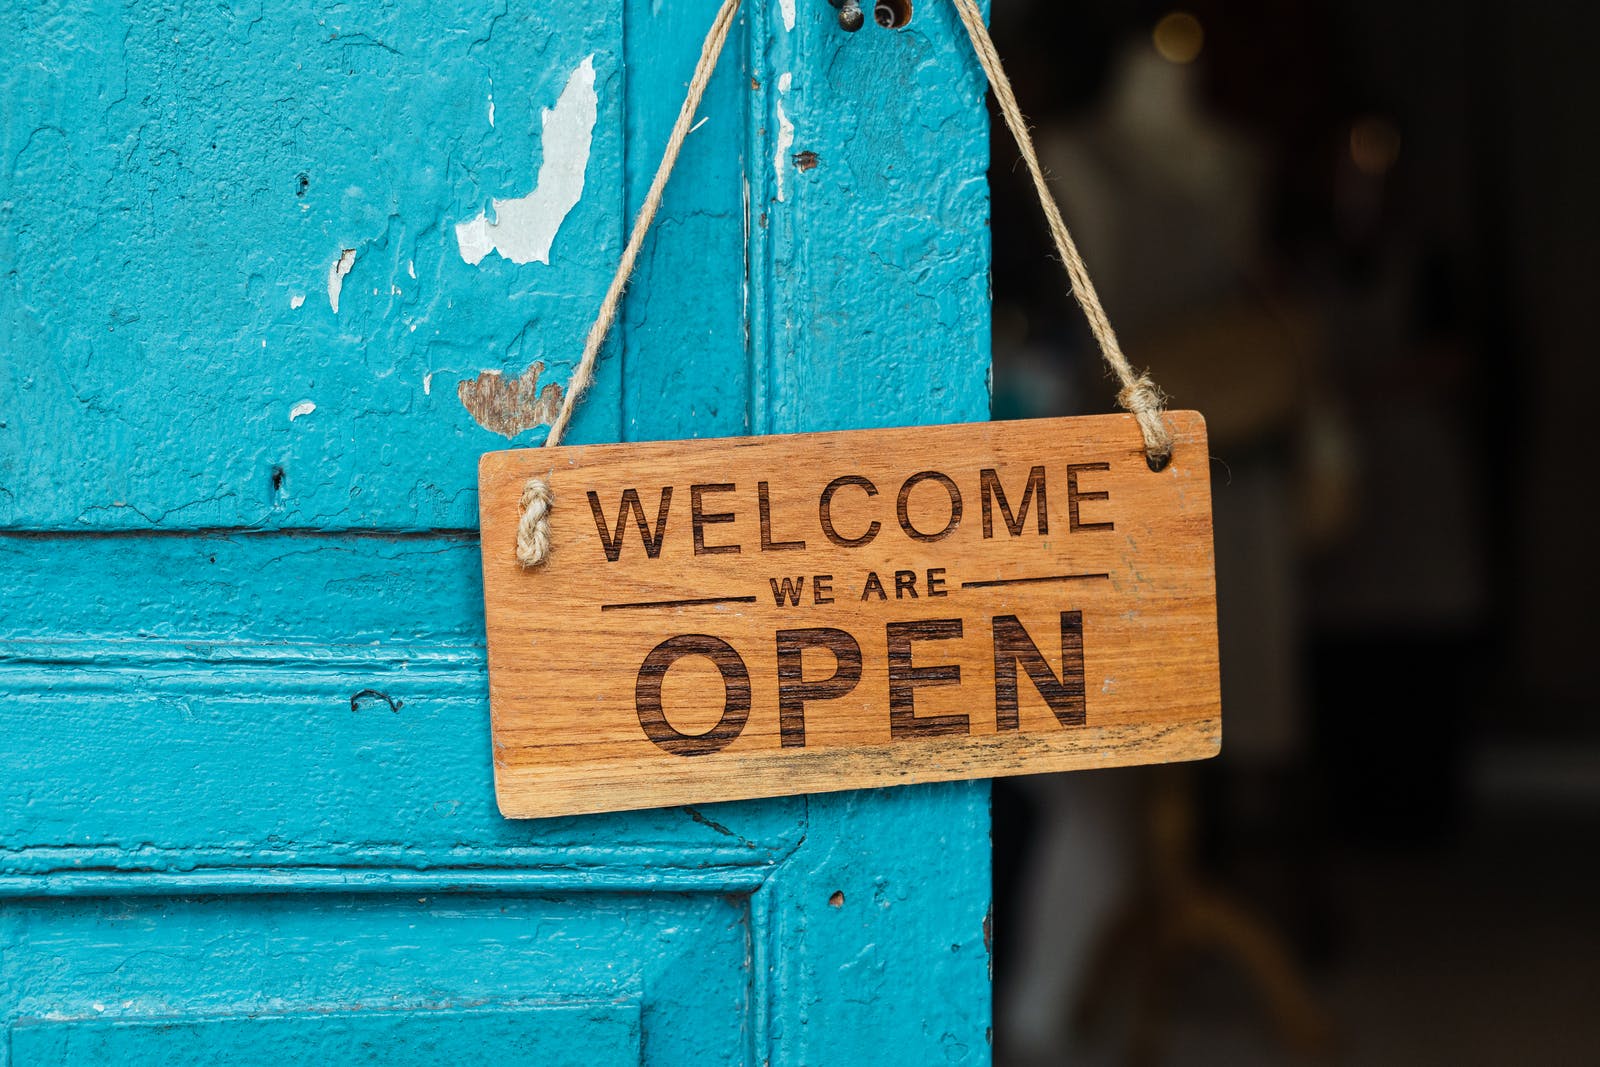 Welcome, we are open sign. Stock image.